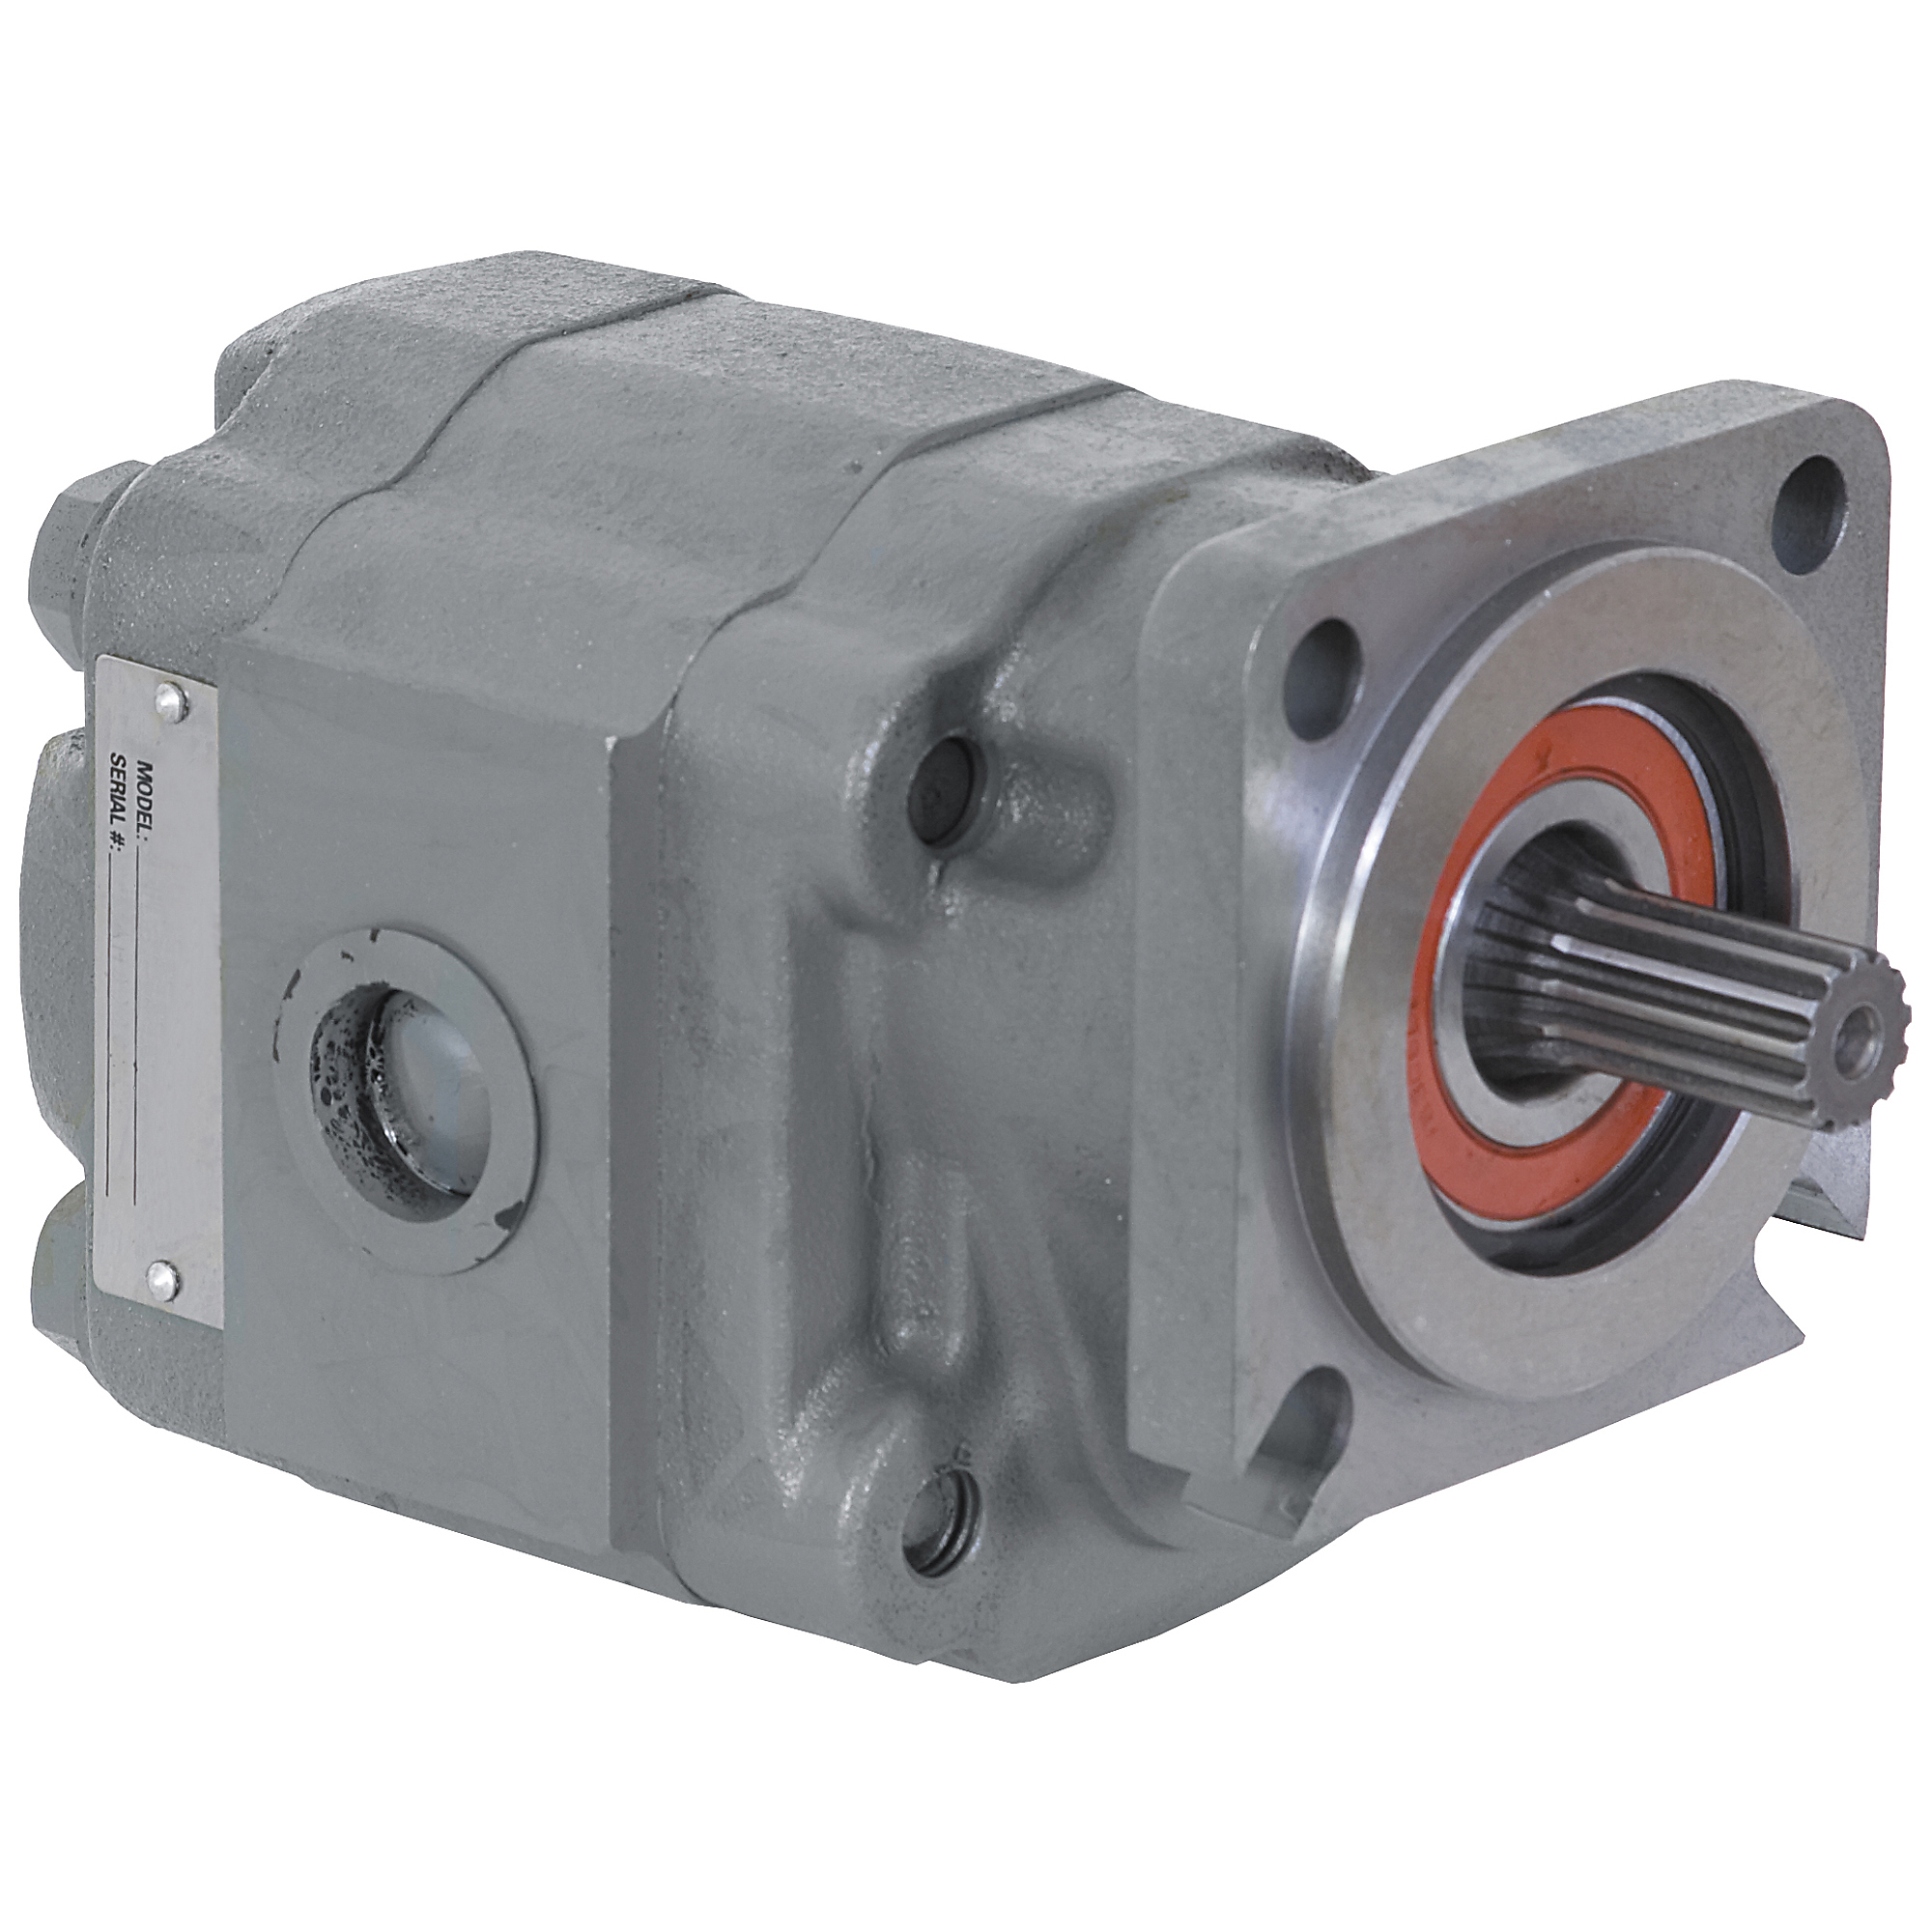 Buyers Products Hydraulic Pump, CCW 4BOLT, Max. PSI 3000, Max. RPM 2000, Model H5134251